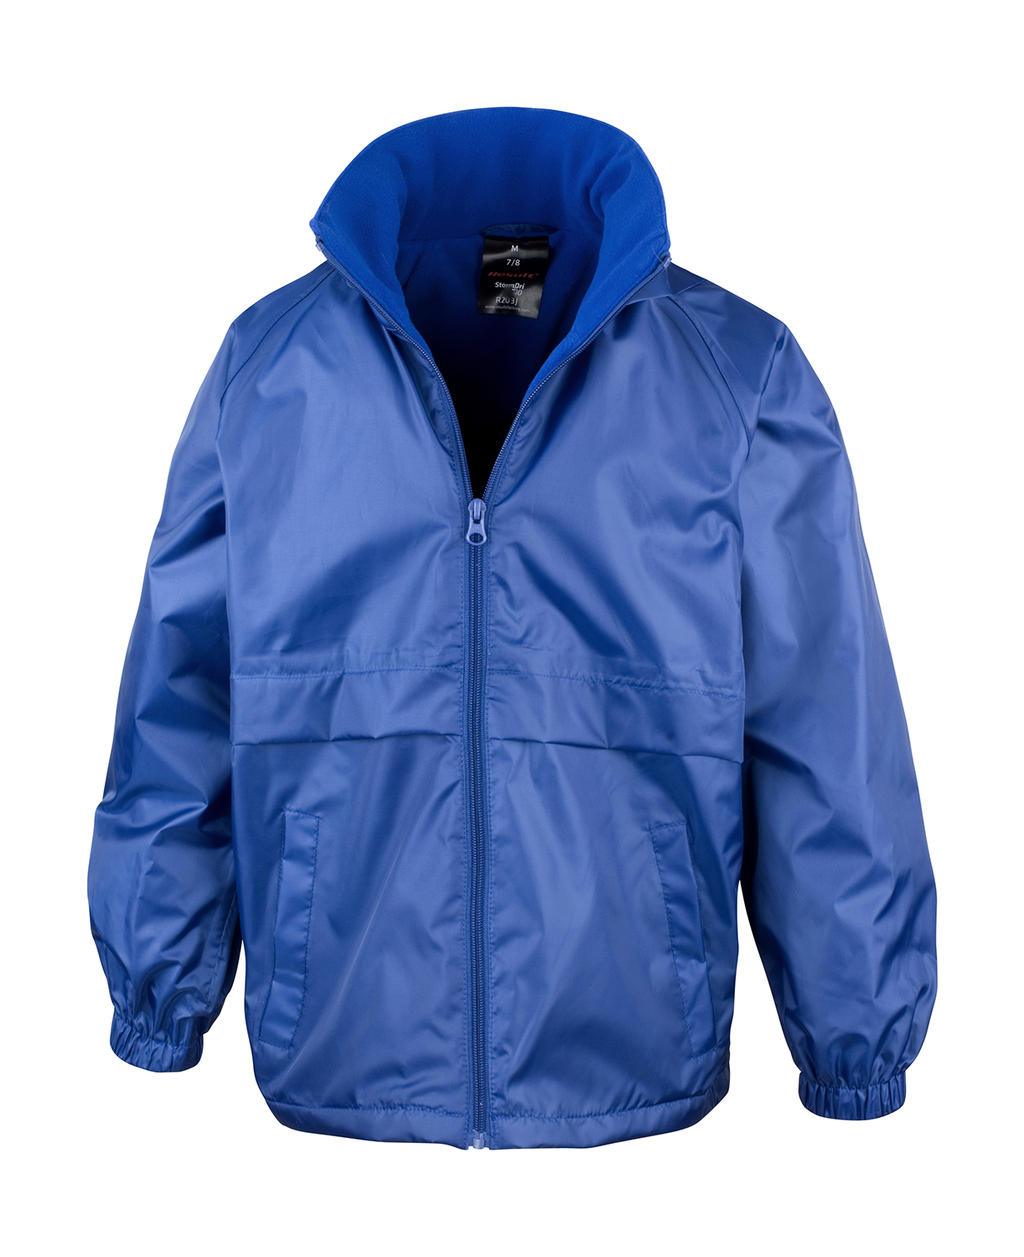  CORE Junior Microfleece Lined Jacket in Farbe Royal